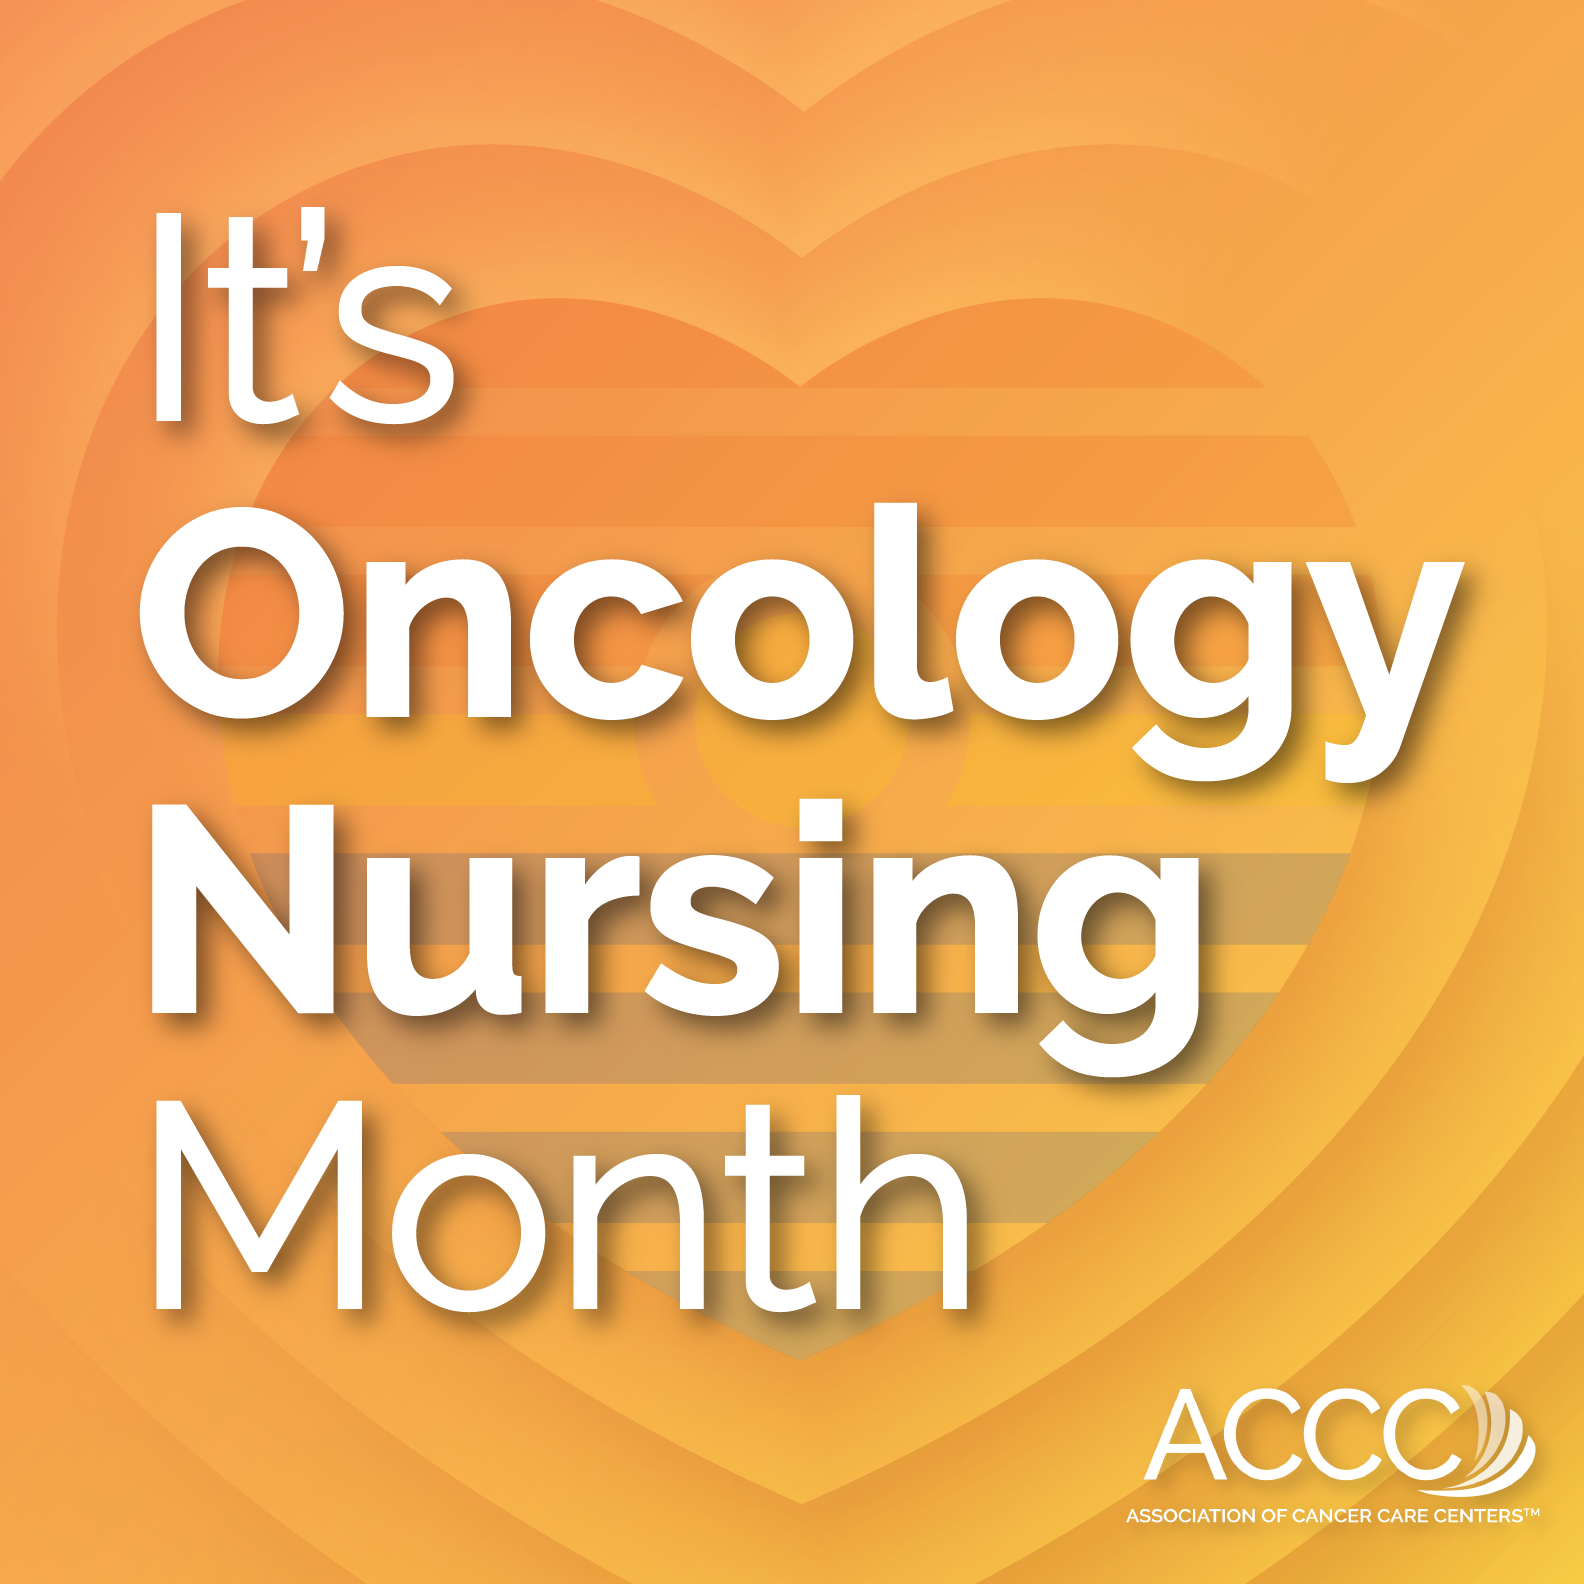 Oncology Nurses: The Heart of Cancer Care
